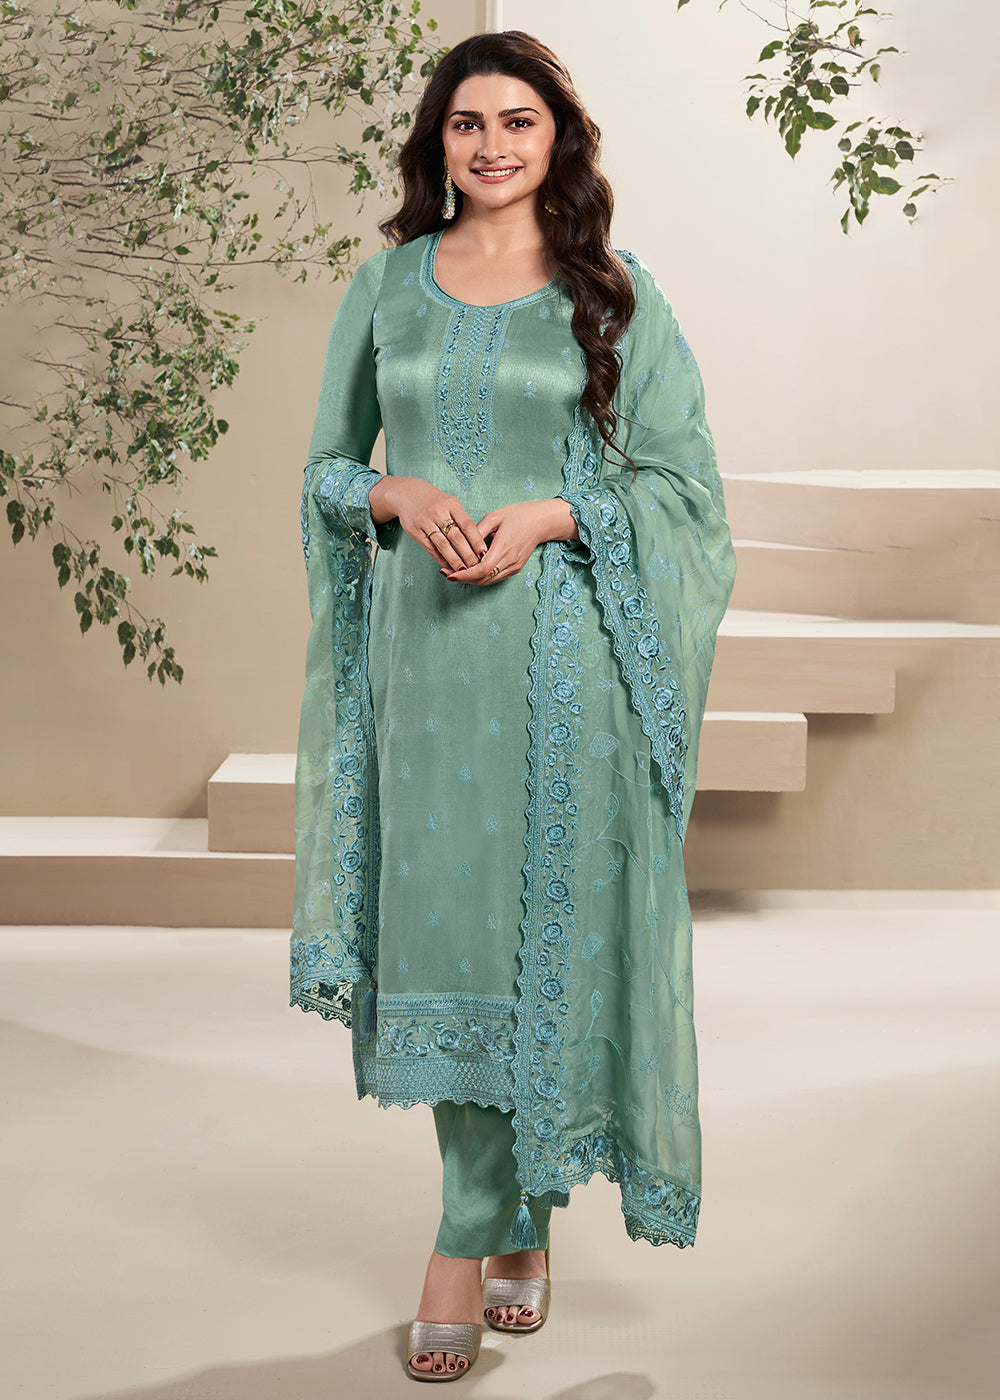 Buy Now Dola Silk Green Thread Embroidered Wedding Salwar Suit Online in USA, UK, Canada, Germany, Australia & Worldwide at Empress Clothing.